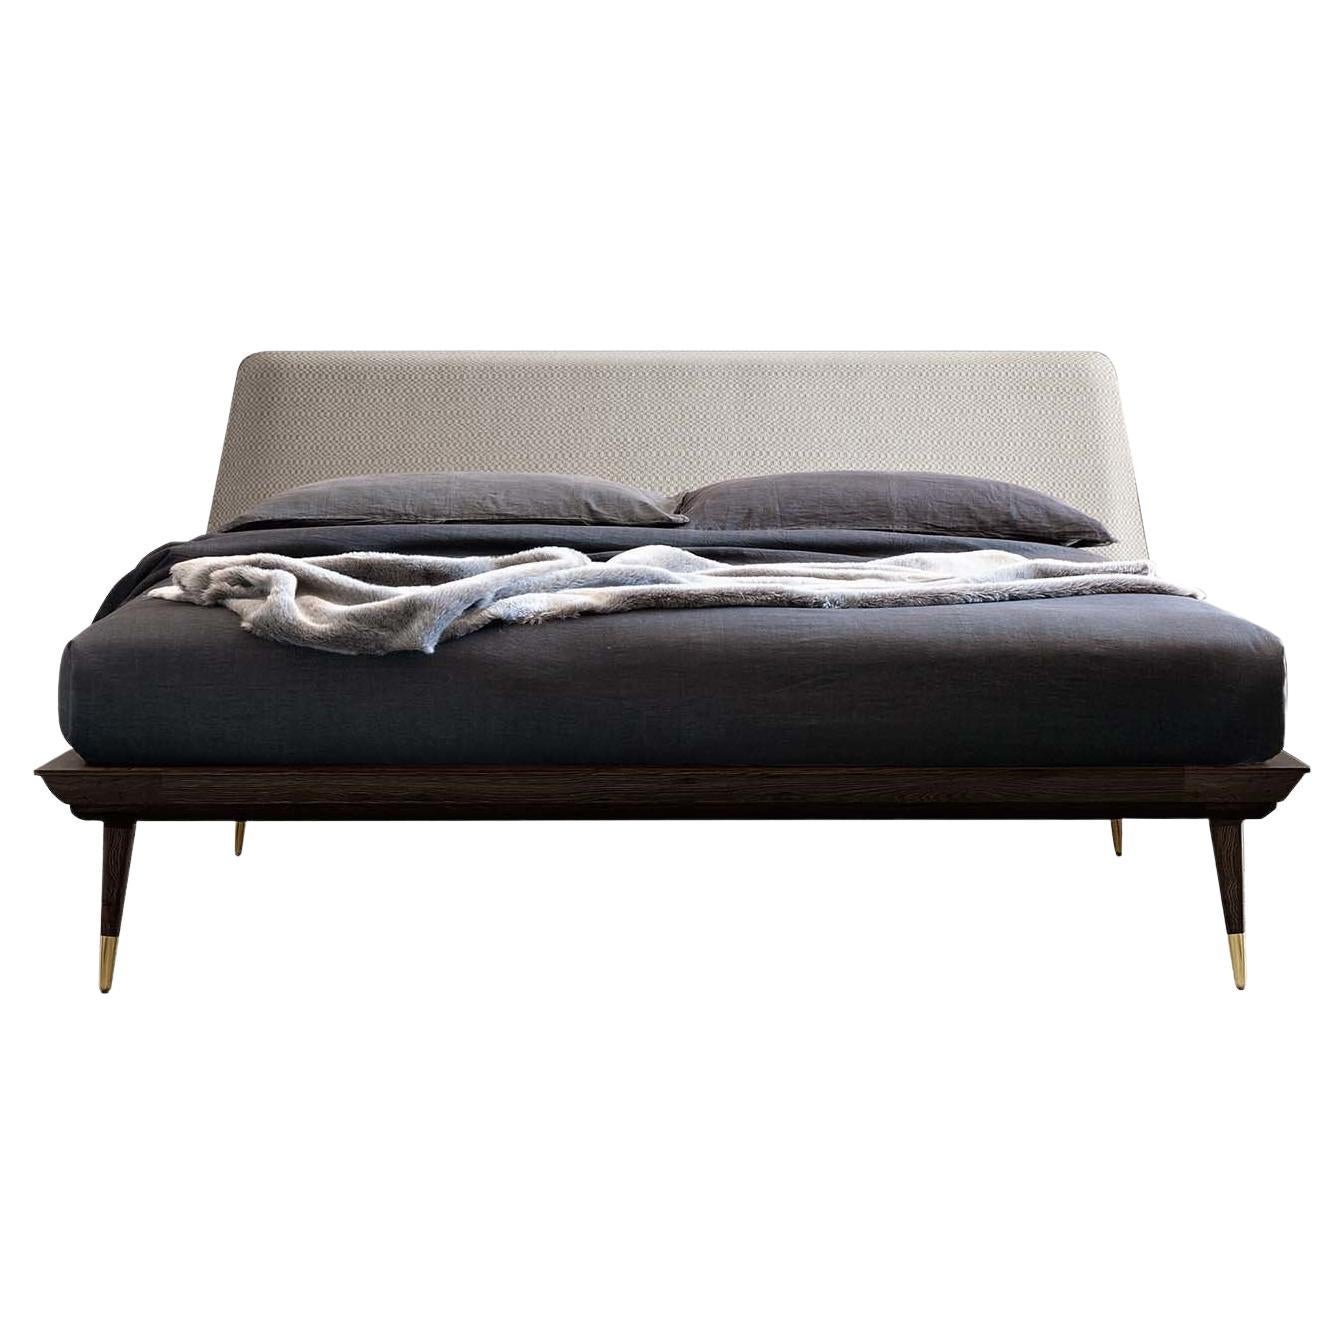 Coco Dark King-Size Bed For Sale